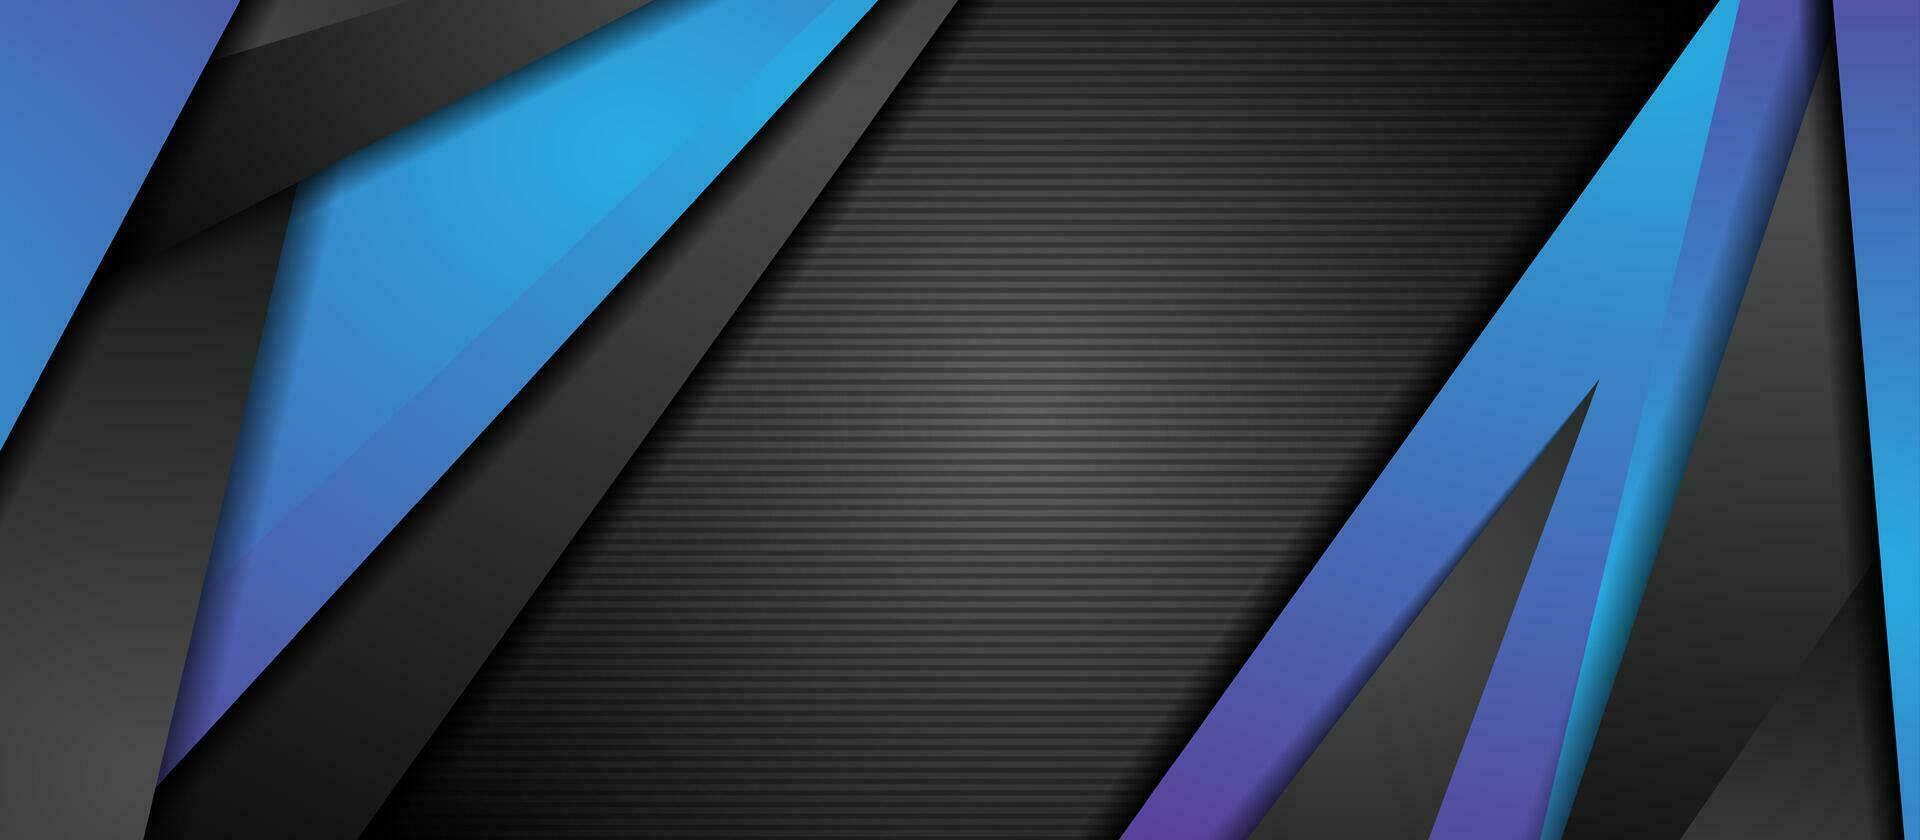 Black and blue tech corporate geometric background vector